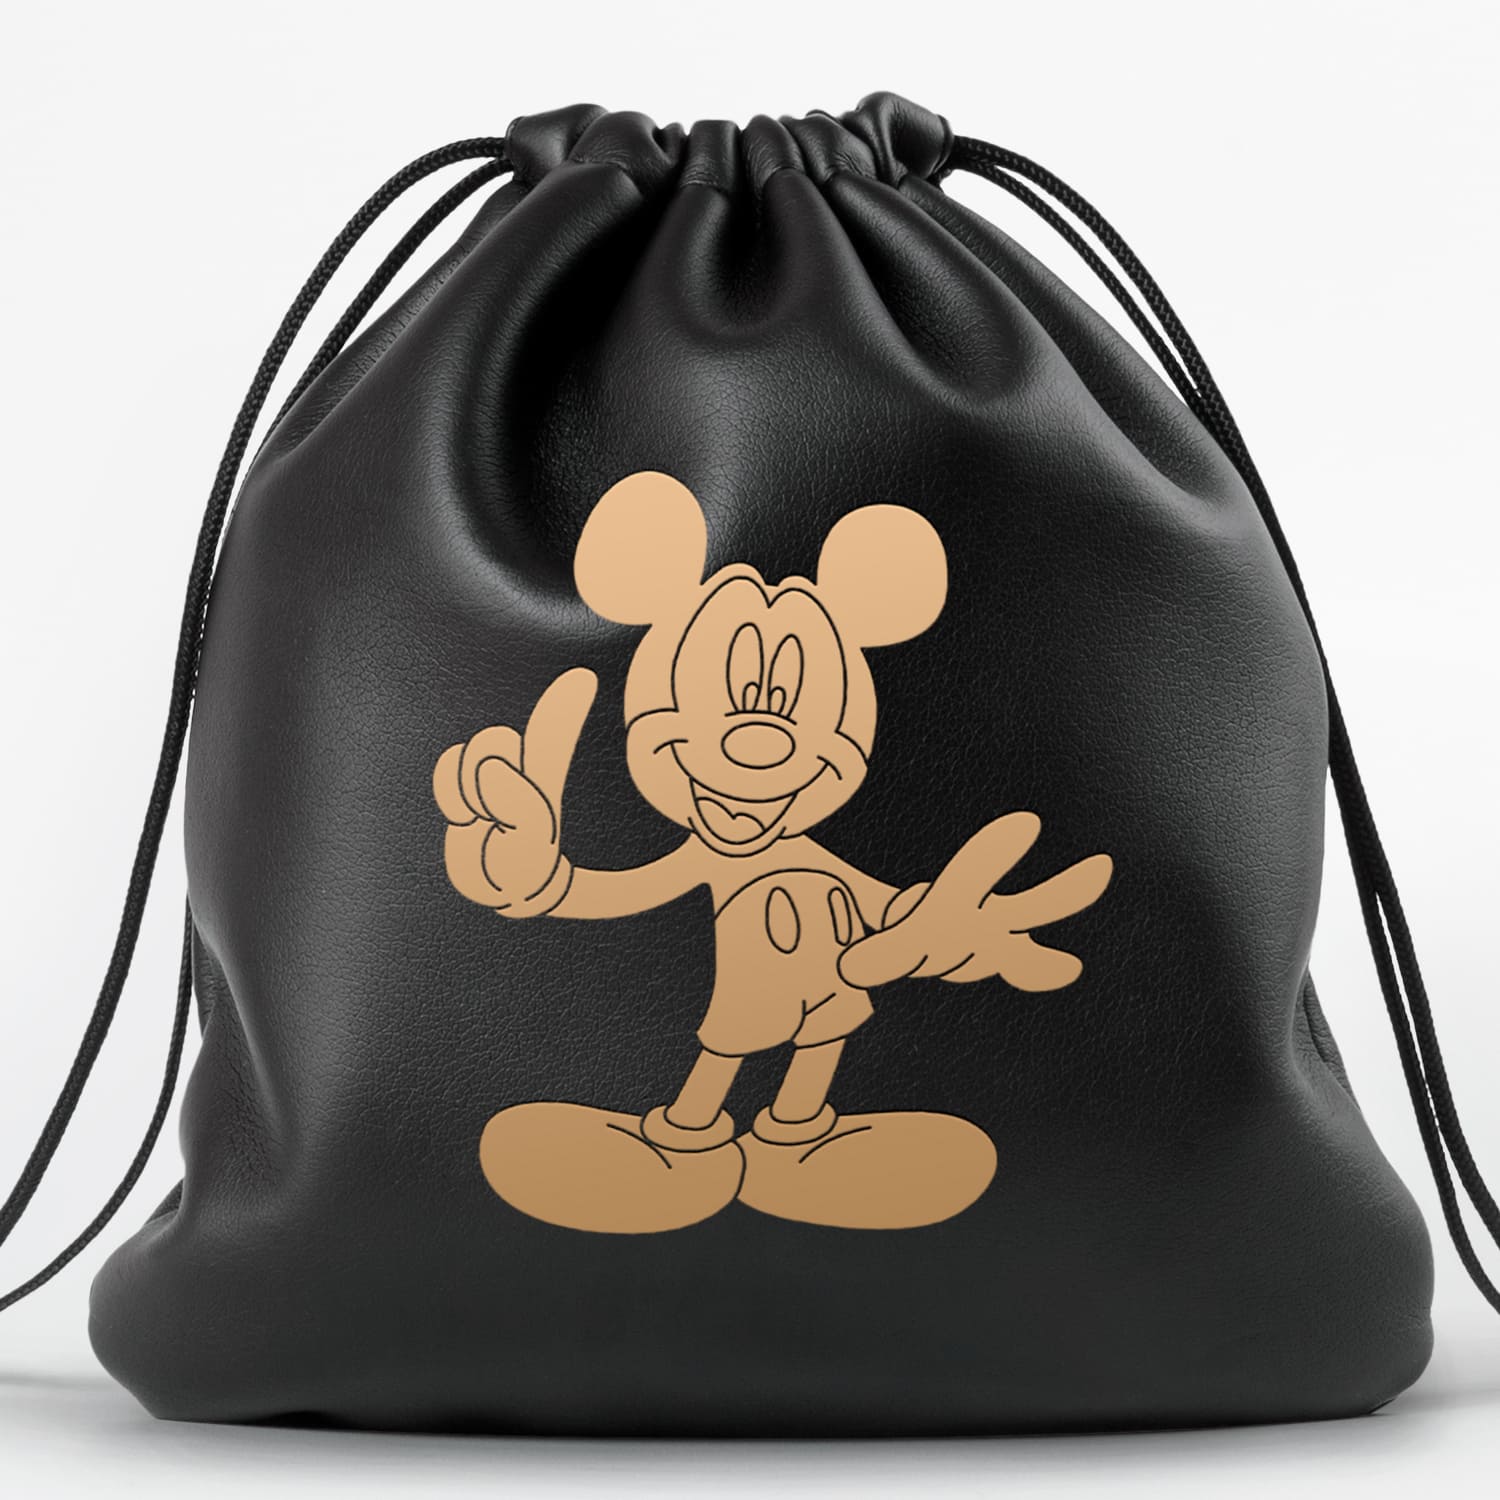 Sport bag with Mickey Mouse Silhouette.